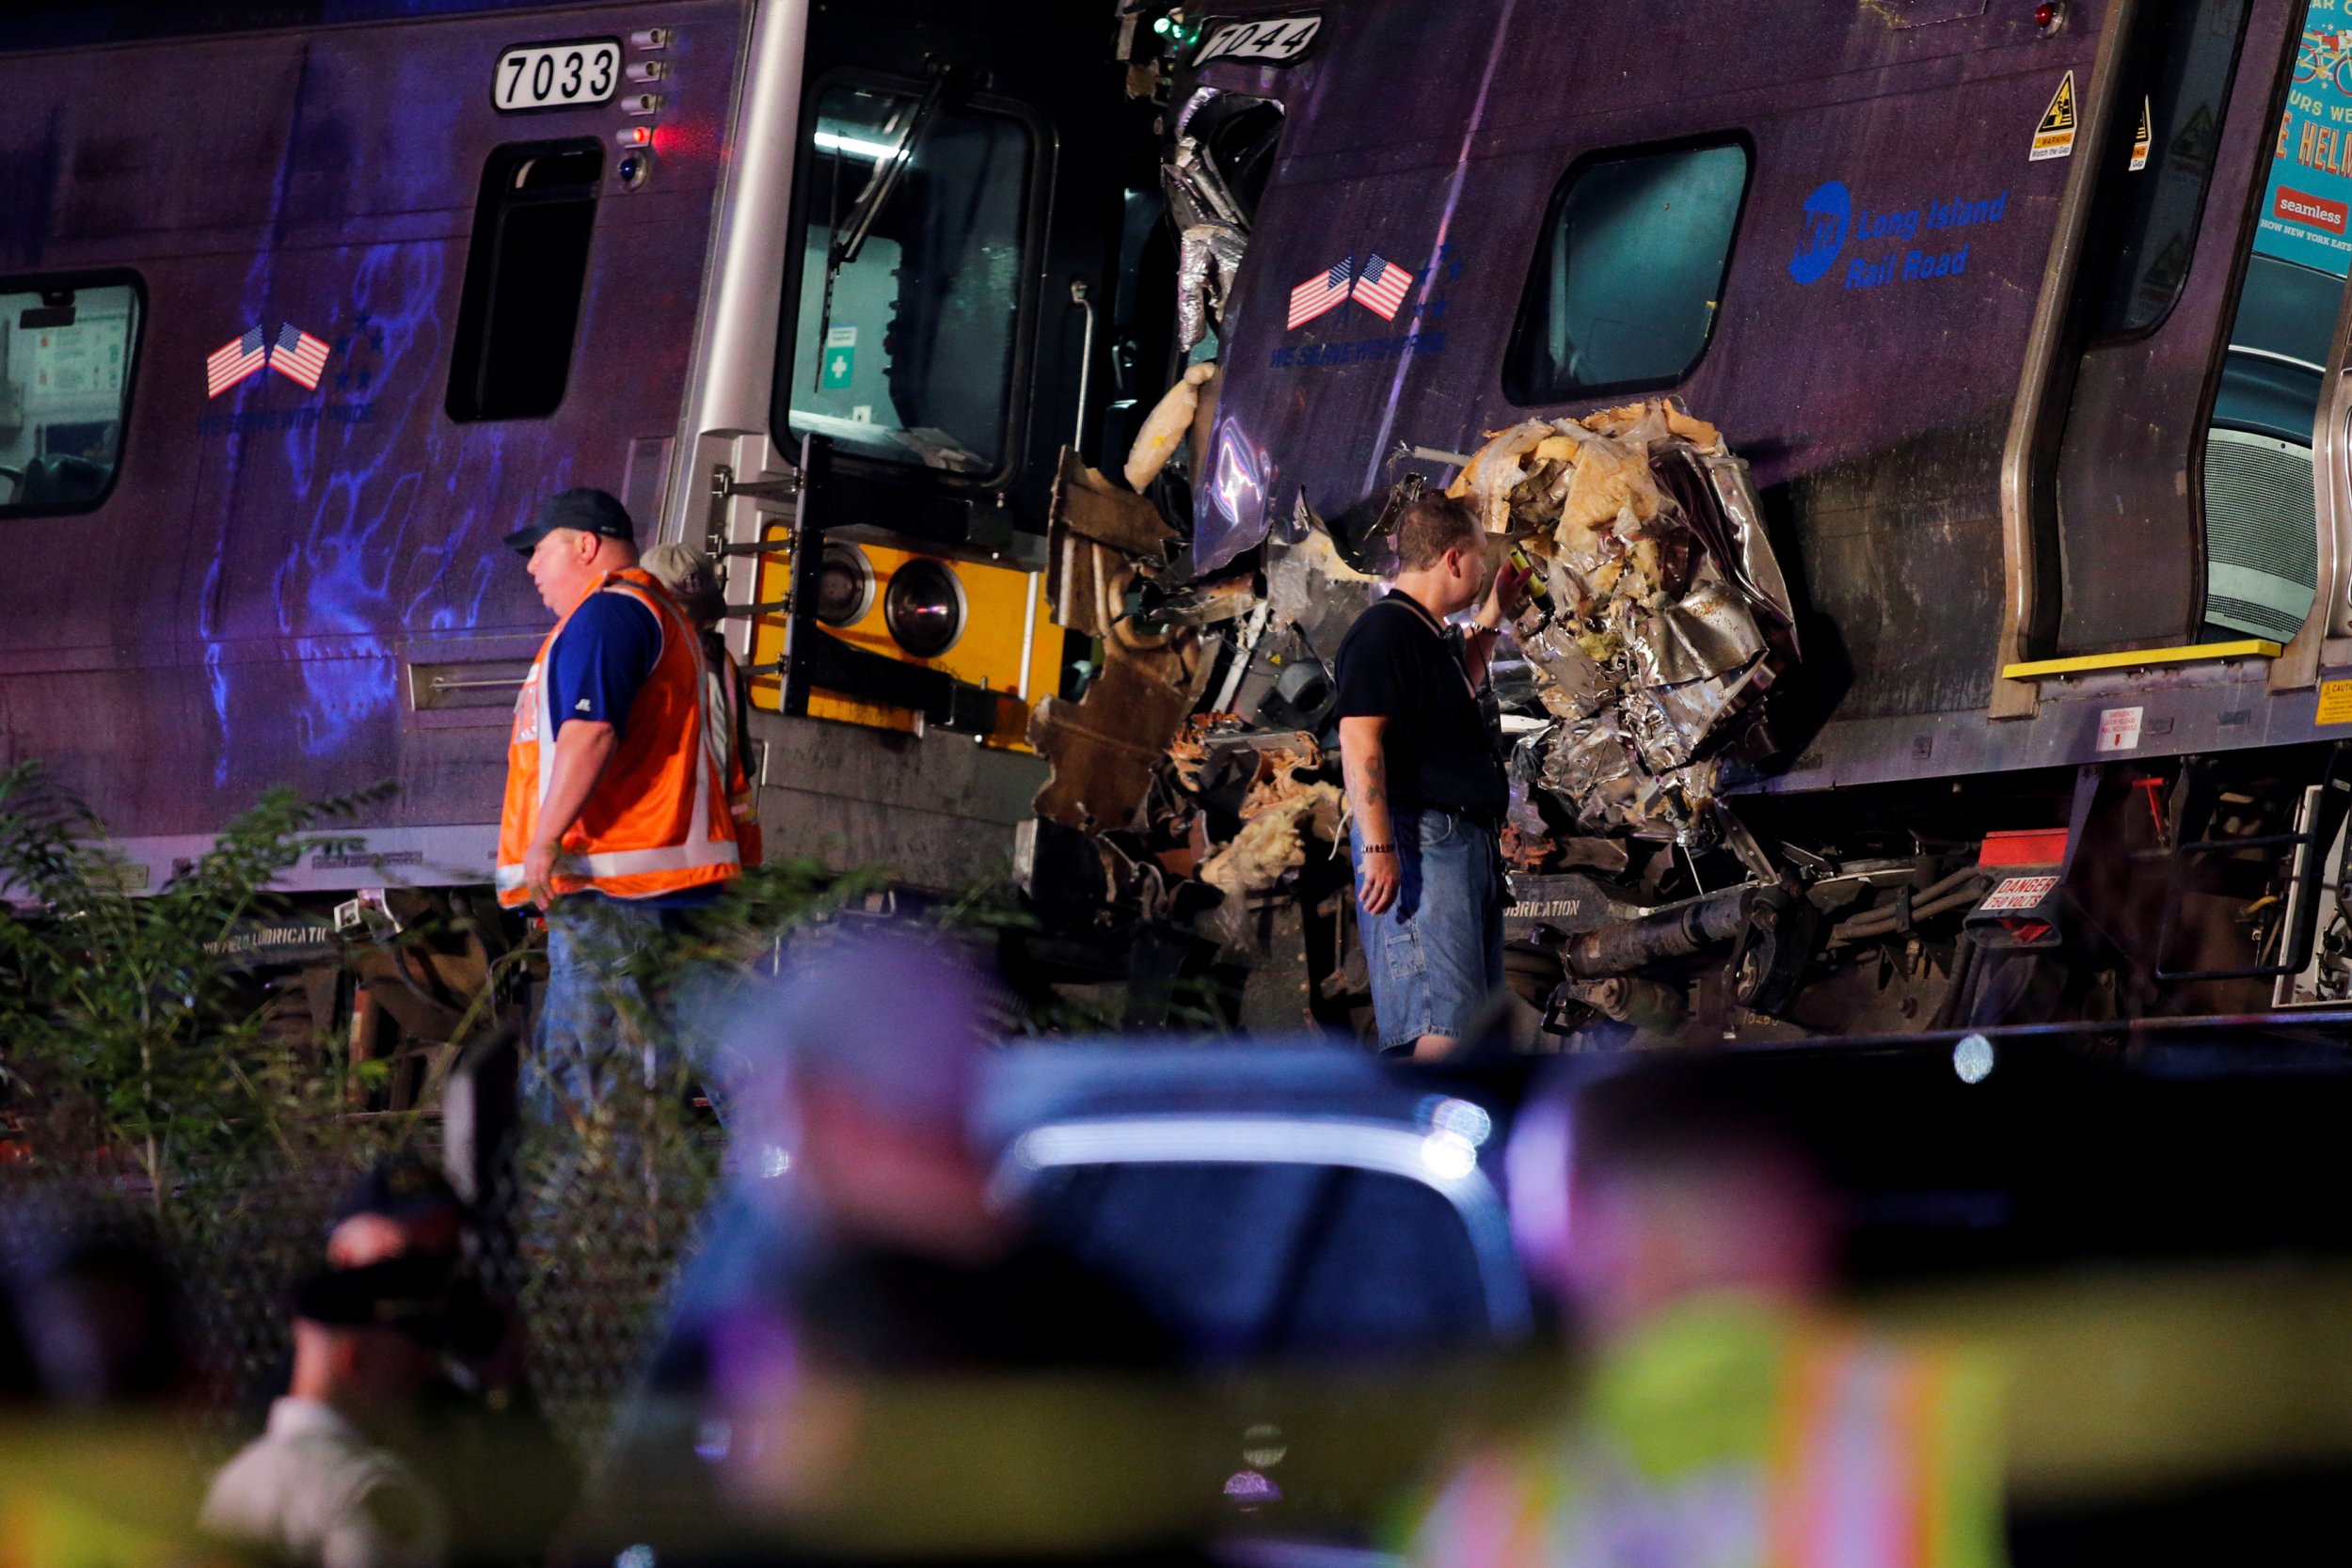 LIRR Accident History 6 Times Long Island Railroad Trains Have Crashed